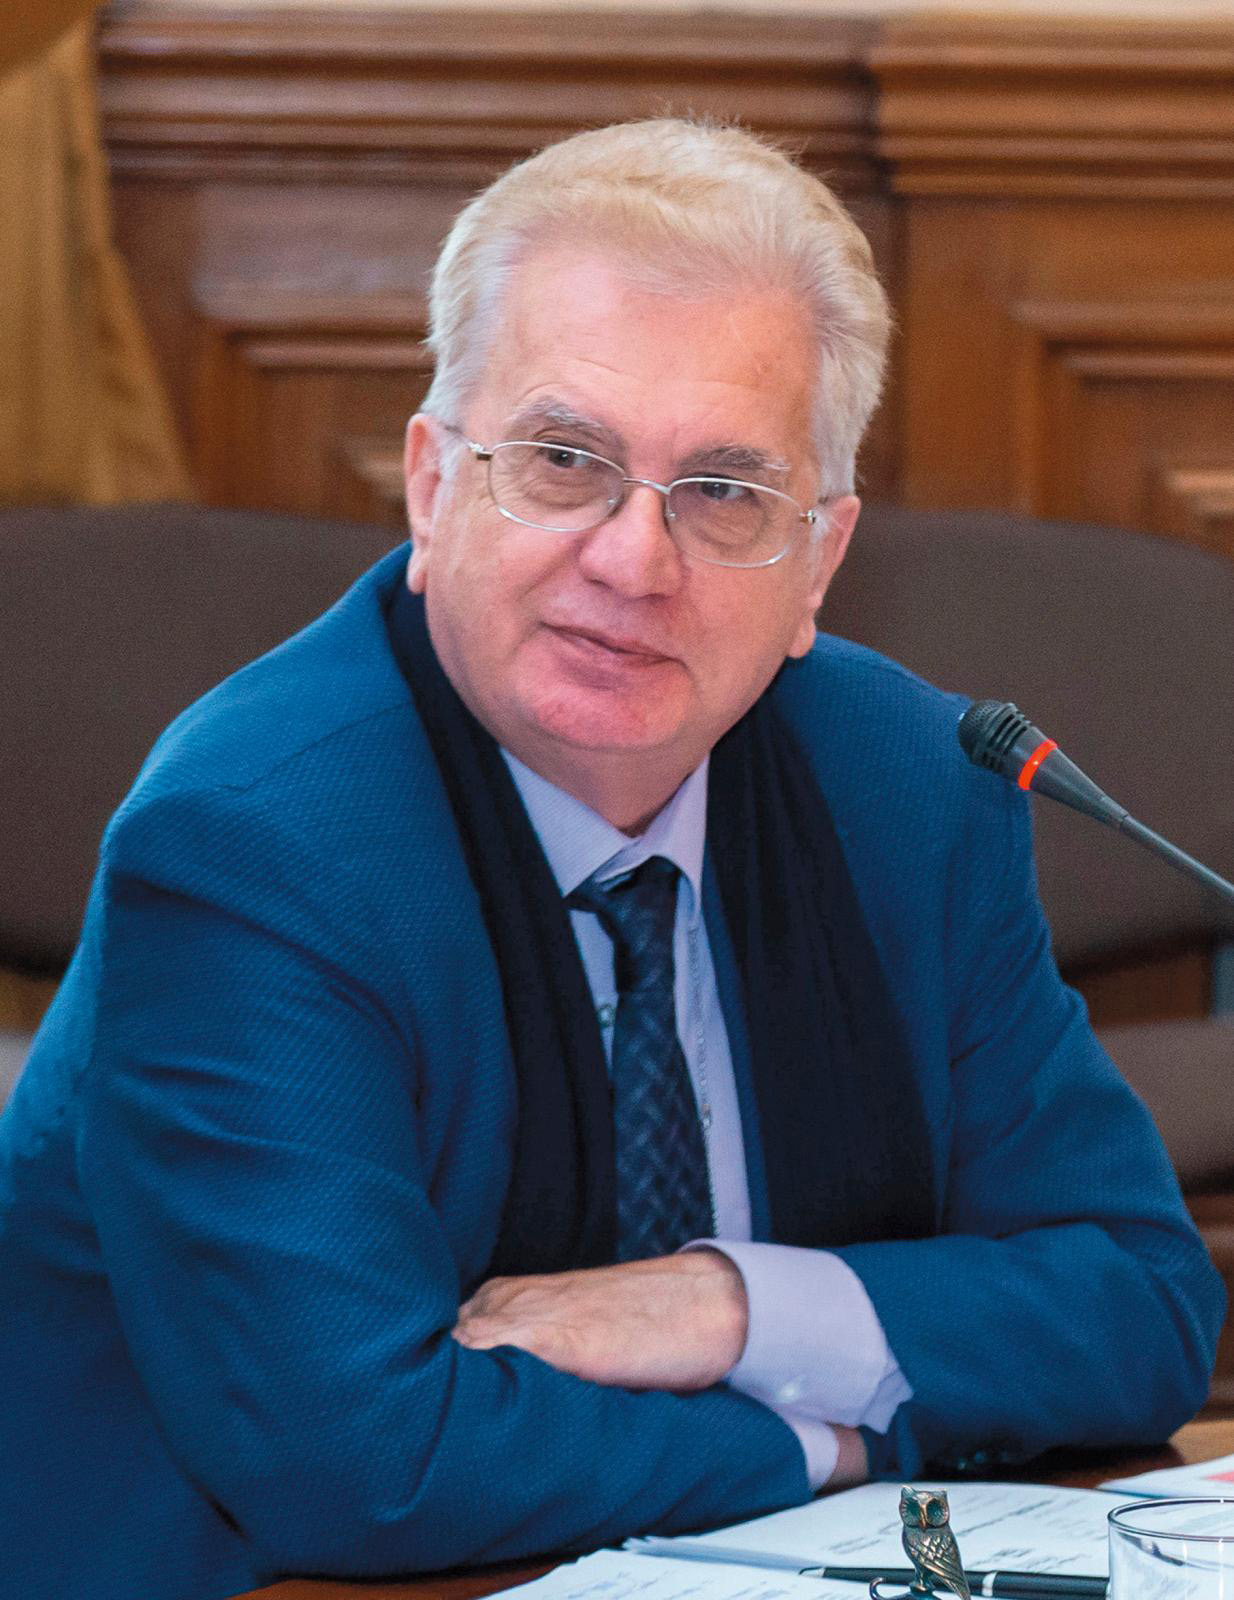 Professor Mikhail Borisovich Piotrovsky, qualified archaeologist and member of the Russian Academy of Sciences.